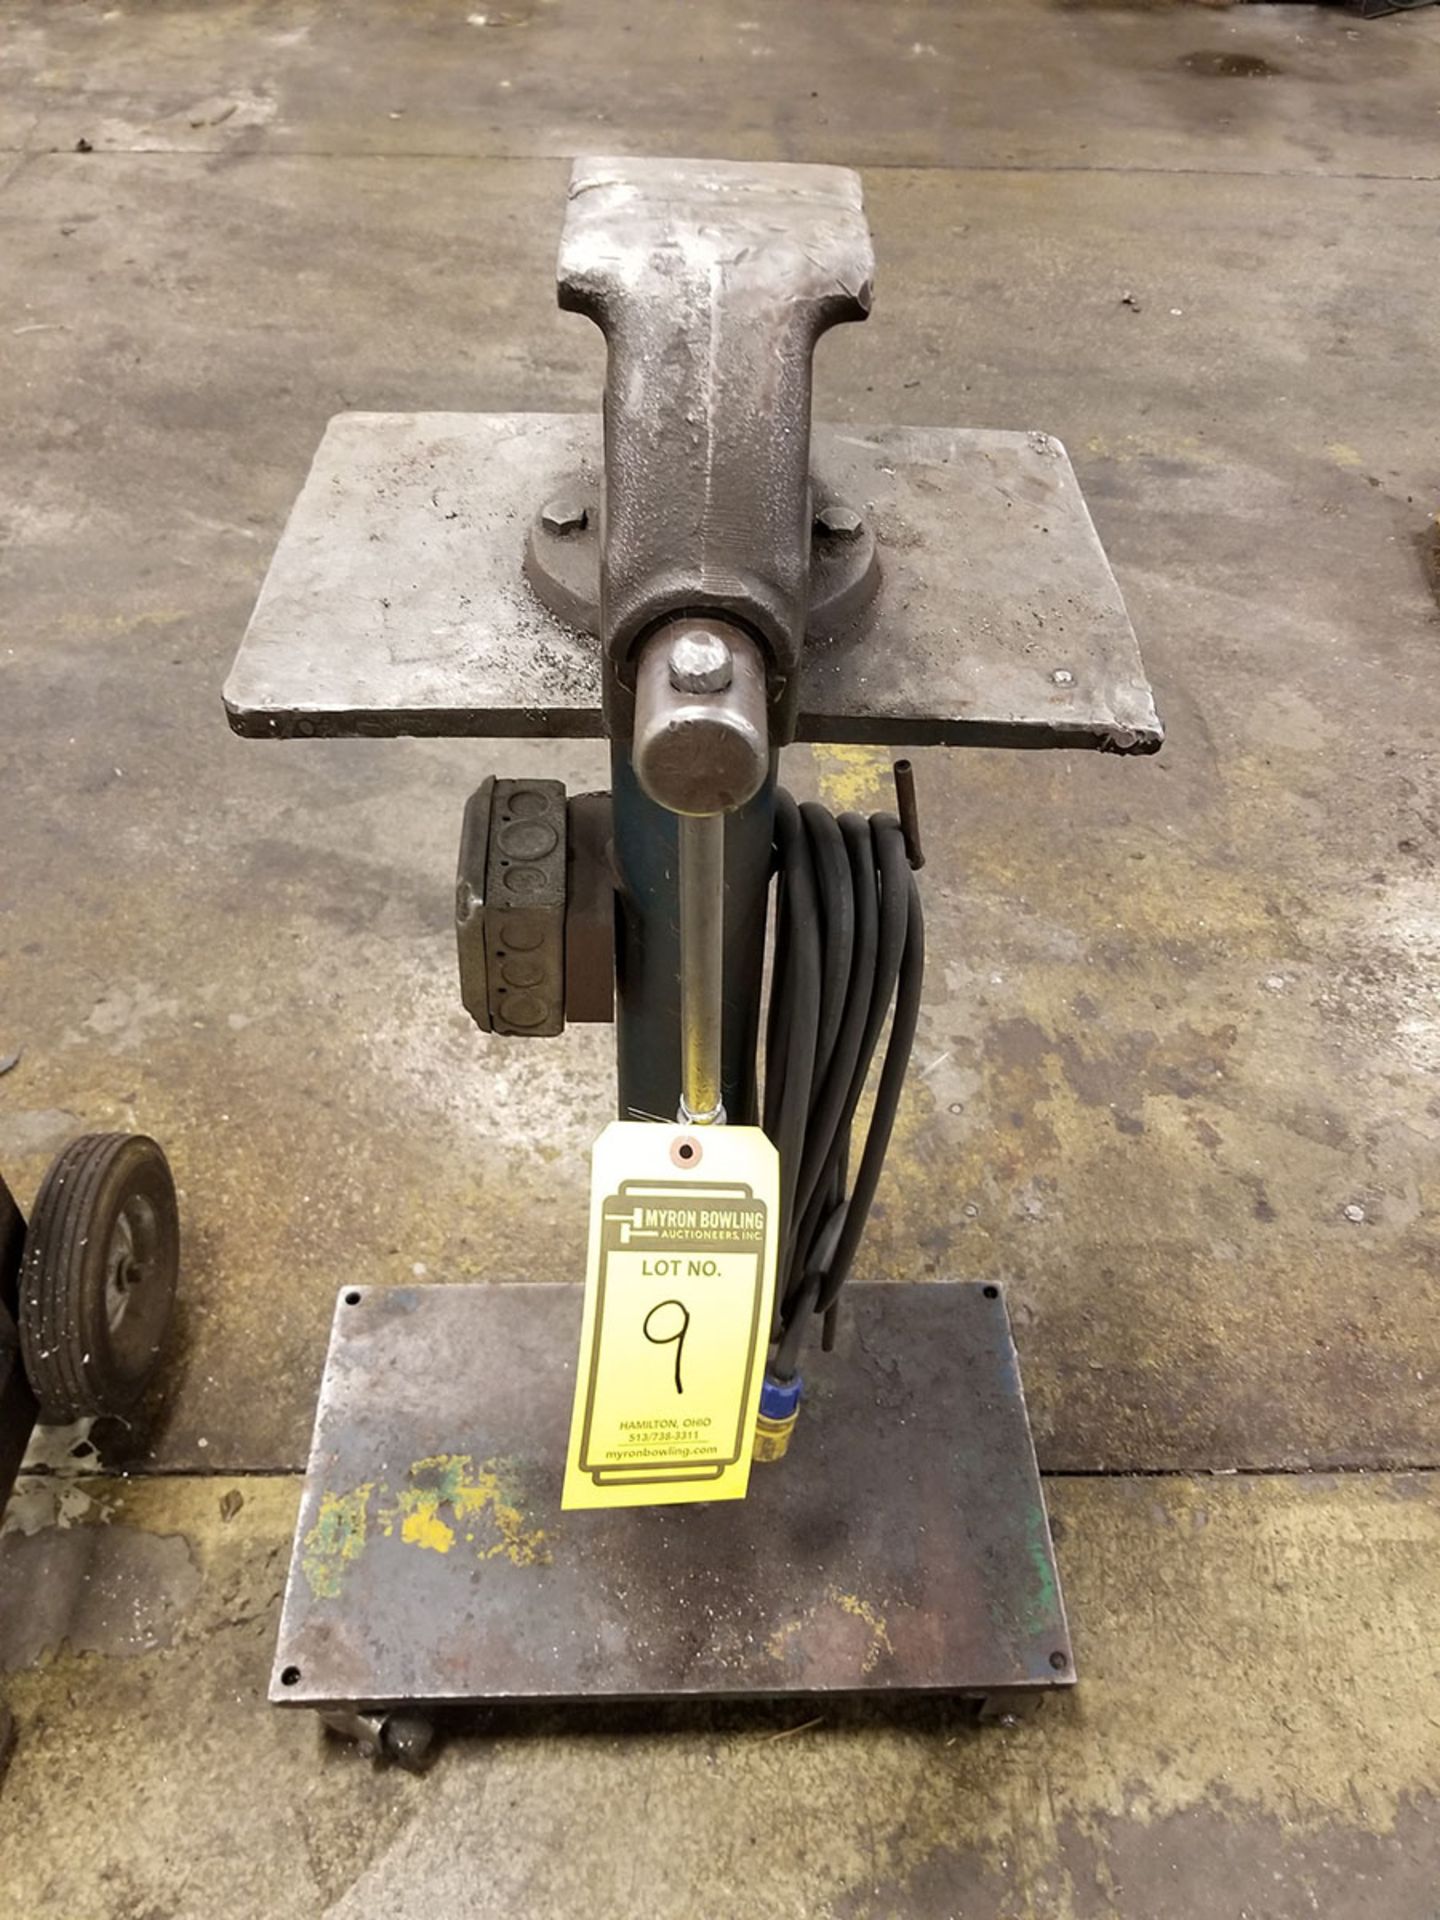 4’‘ ROLLING PEDESTAL ANVIL VISE ON HD STEEL CART WIRED WITH 110V CORD AND OUTLET - Image 2 of 4